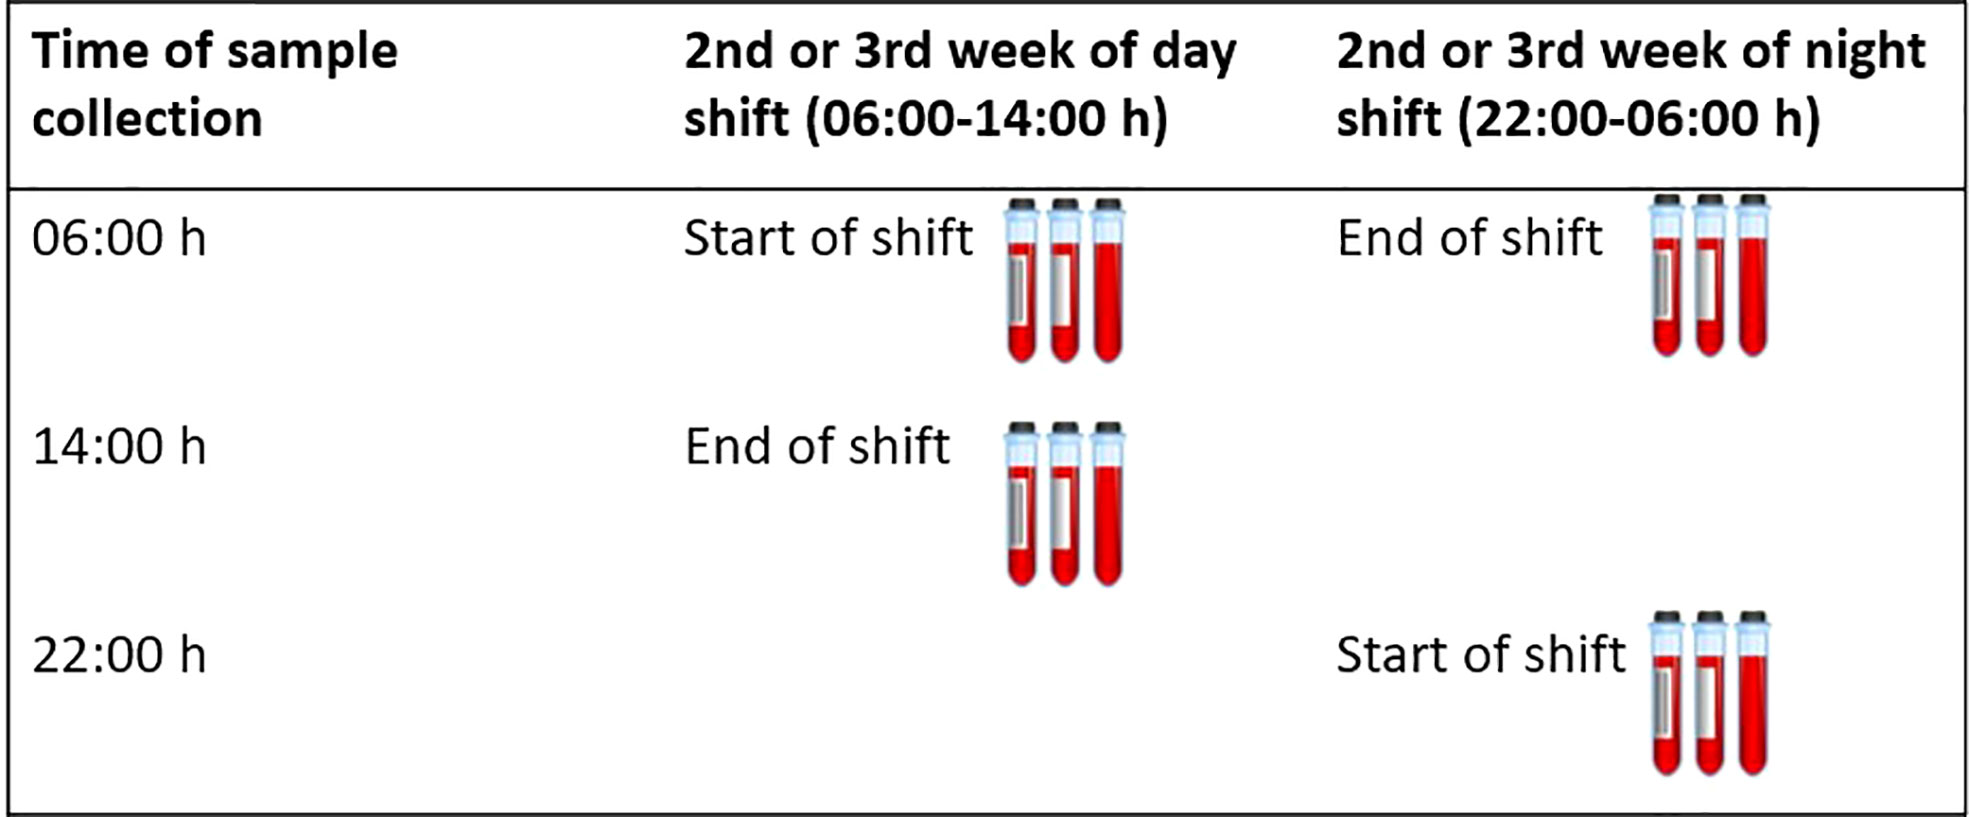 Frontiers  The Impact of Rotating Night Shift Work and Daytime